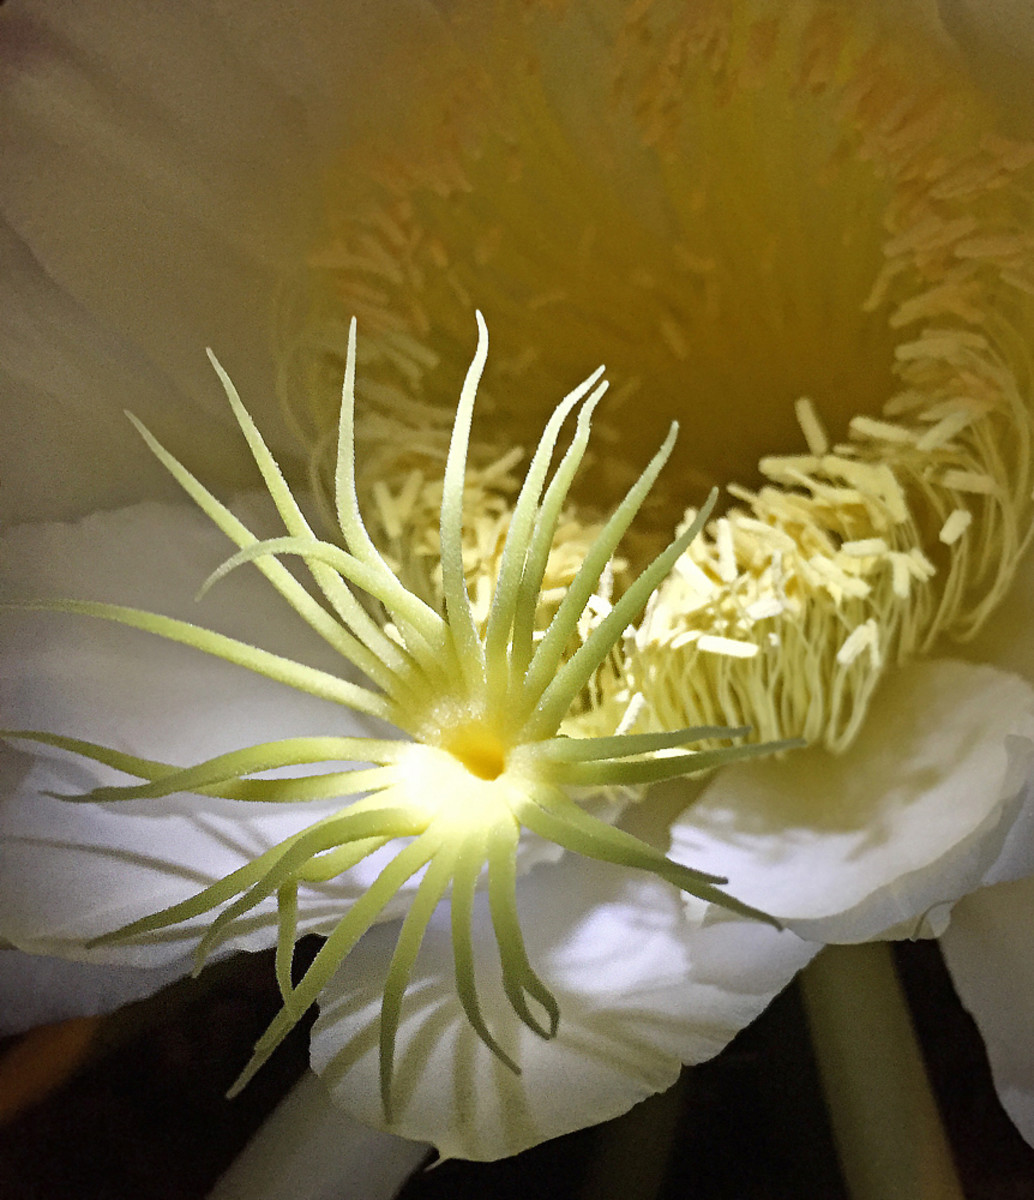 Is that a sea monster or the reproductive part of a Cereus flower?